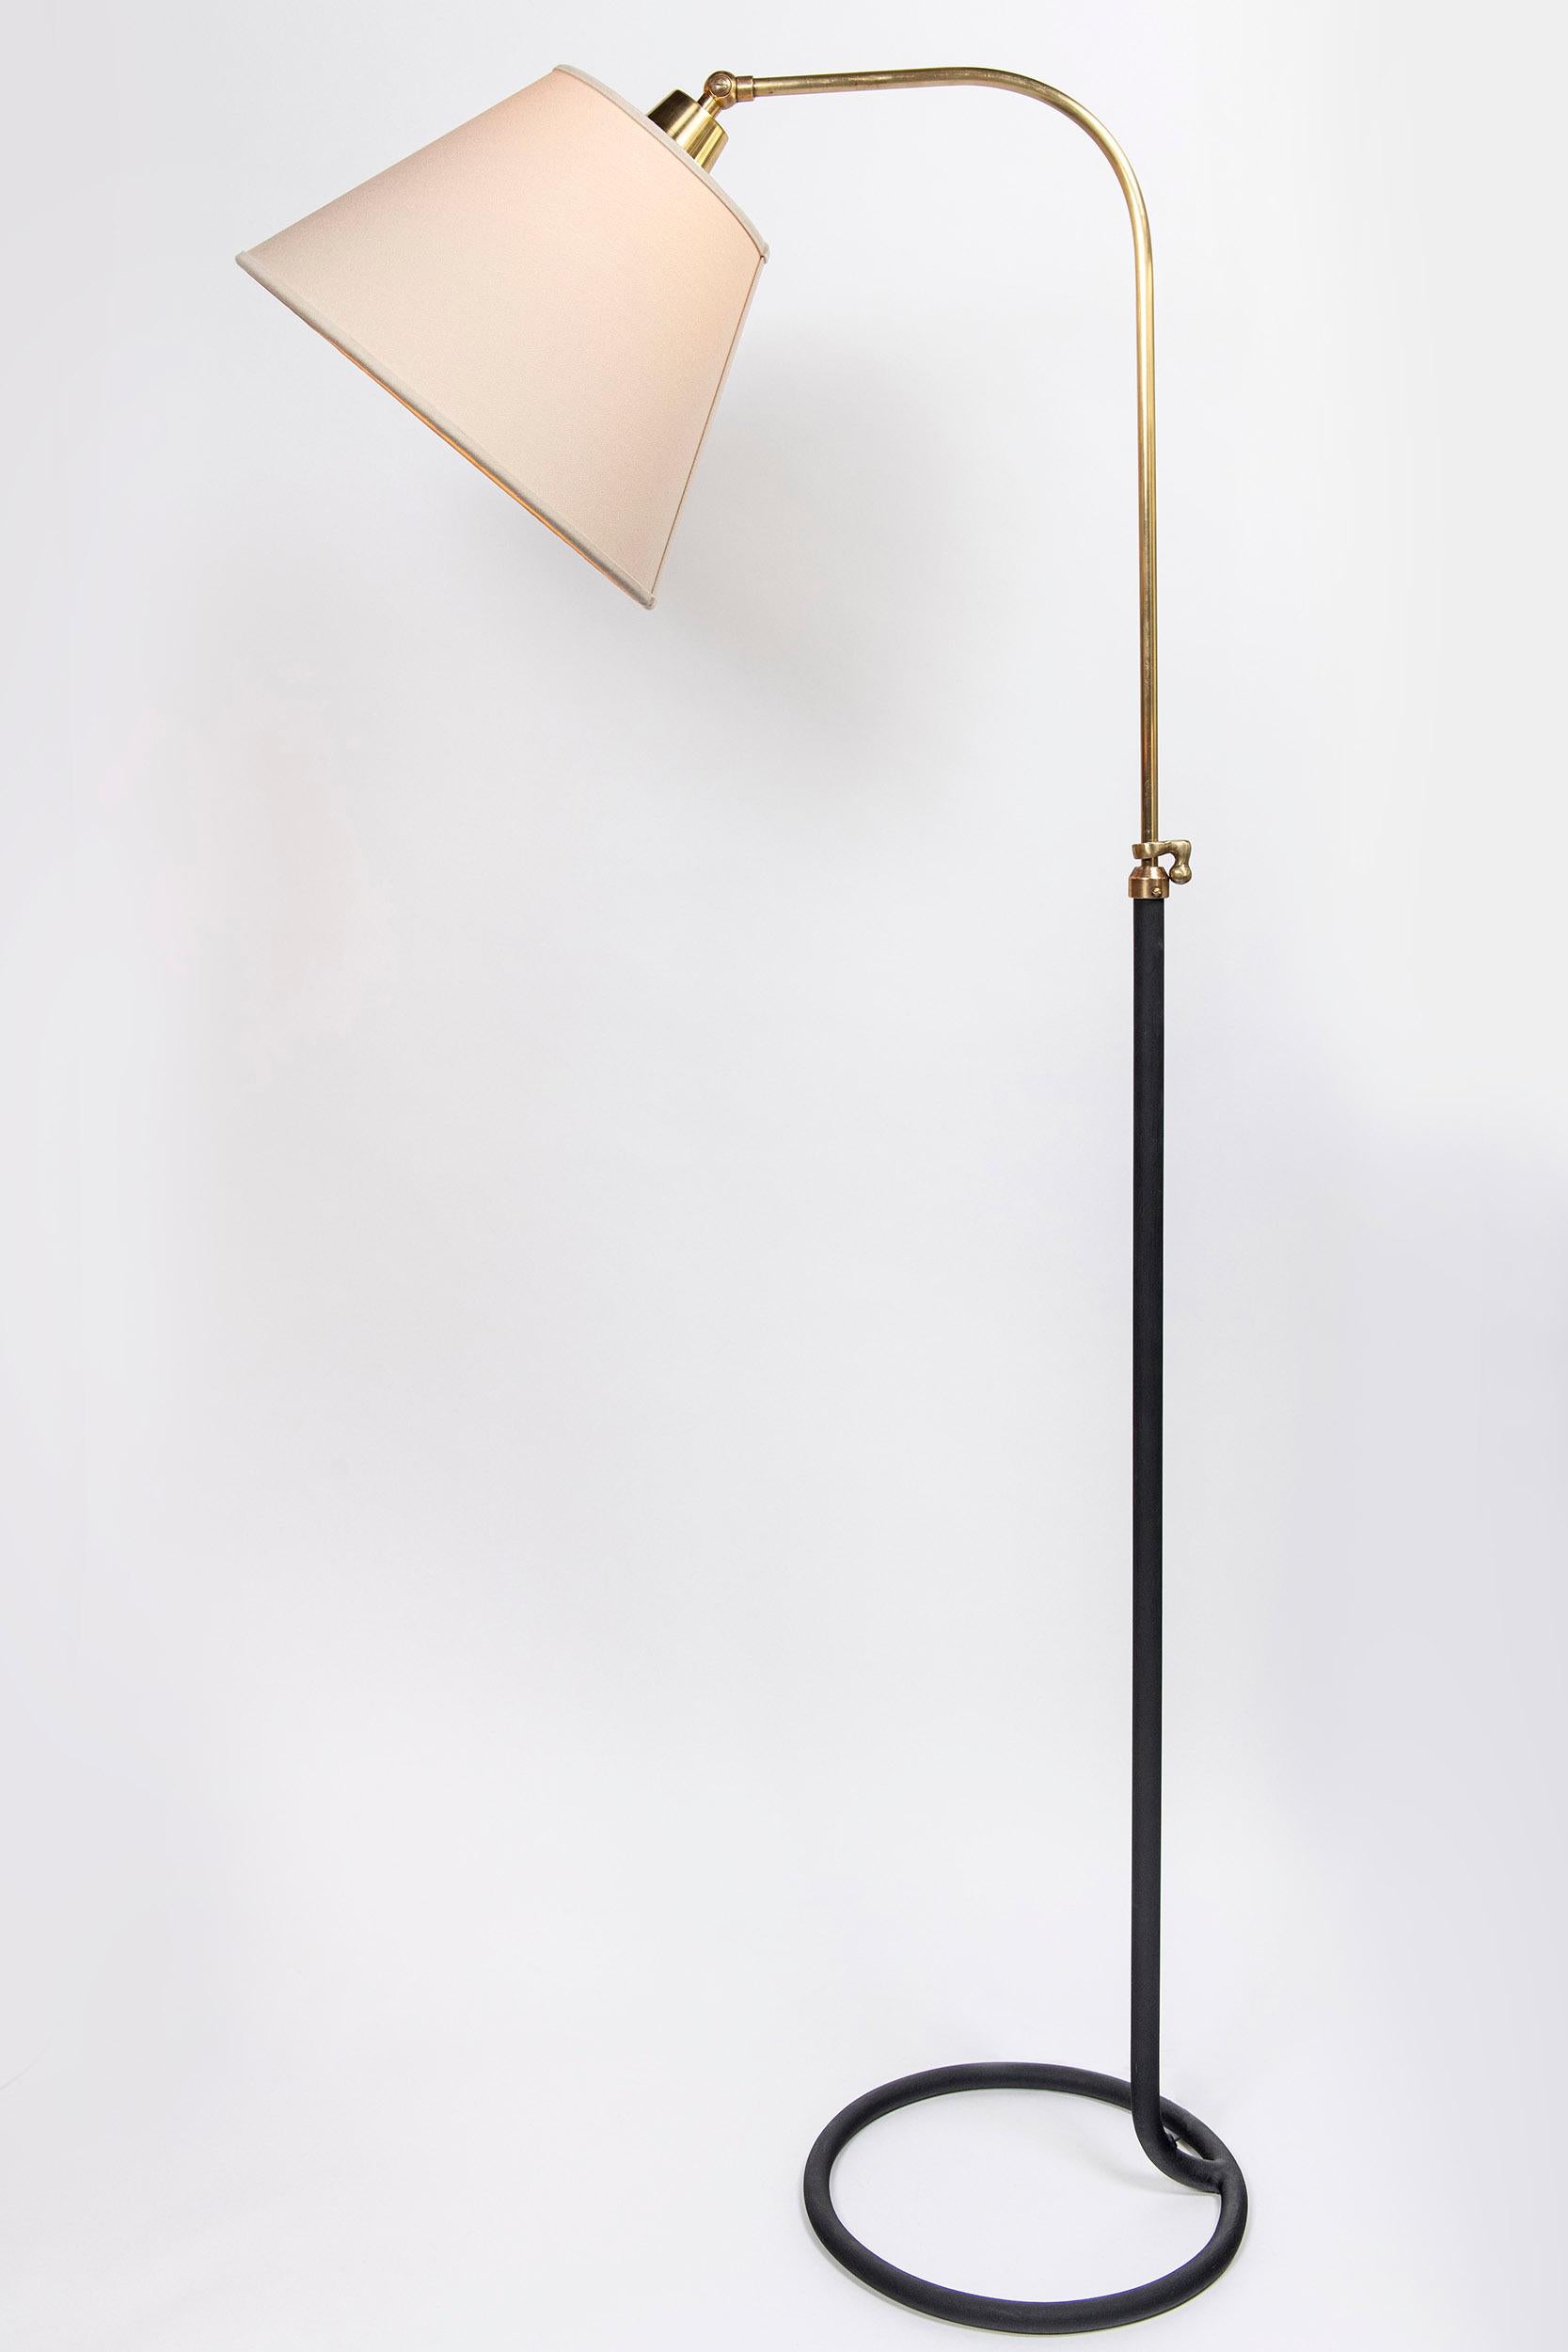 Pair of Iron and Bronze Floor Lamps, by Comte, Argentina, Buenos Aires, c. 1940 For Sale 1